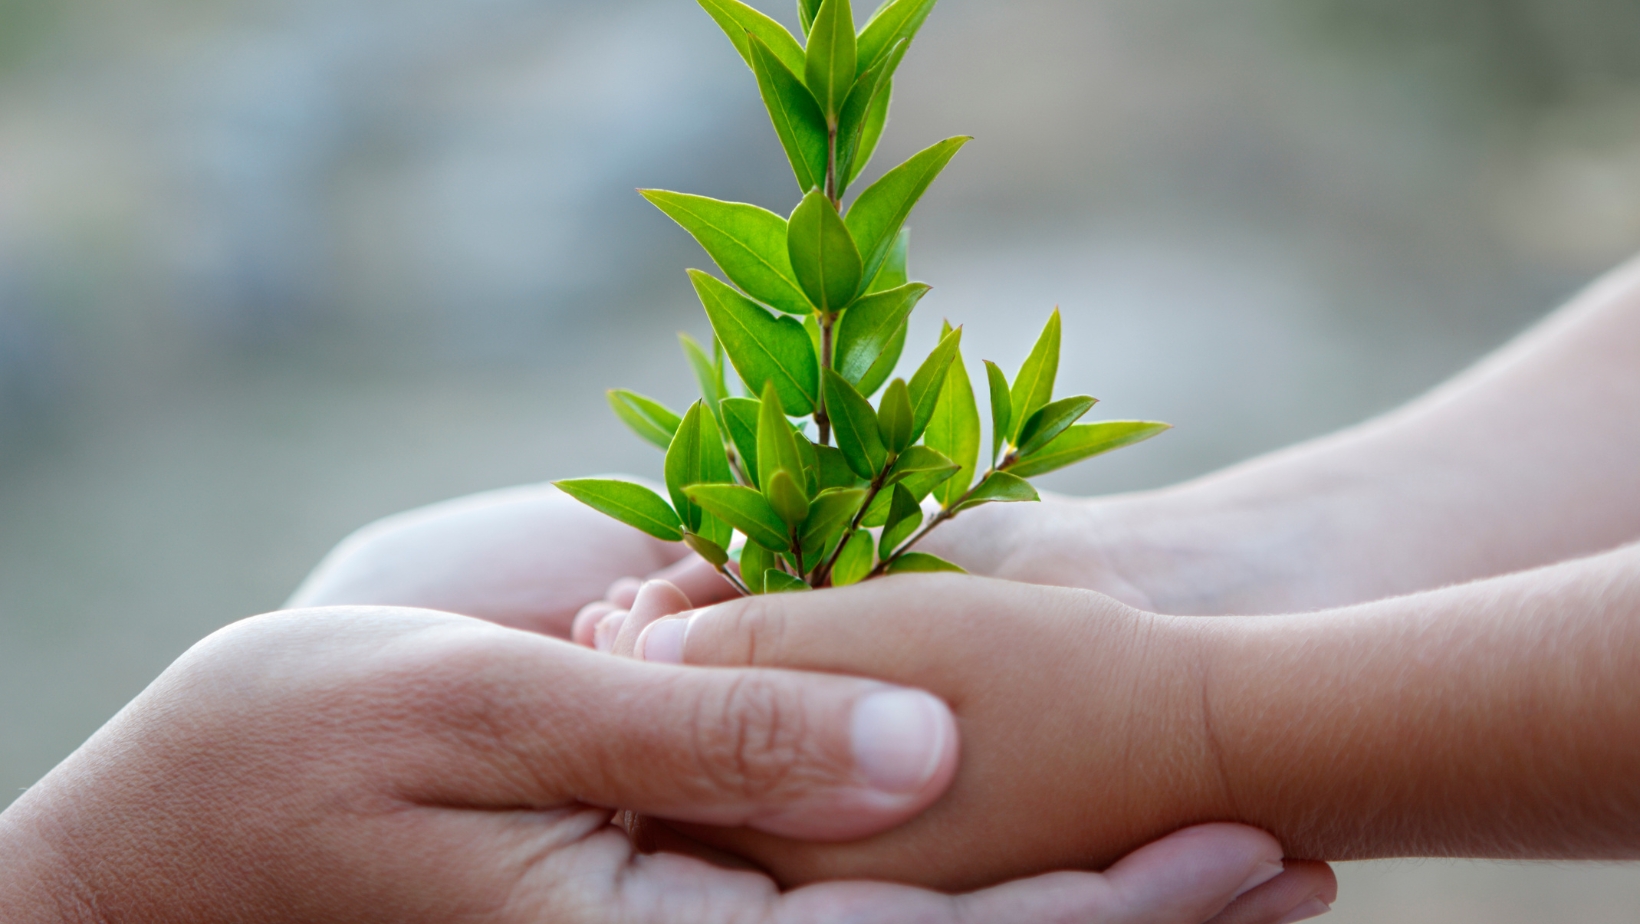 An adult's hands cup a child's hands who are holding a small plant